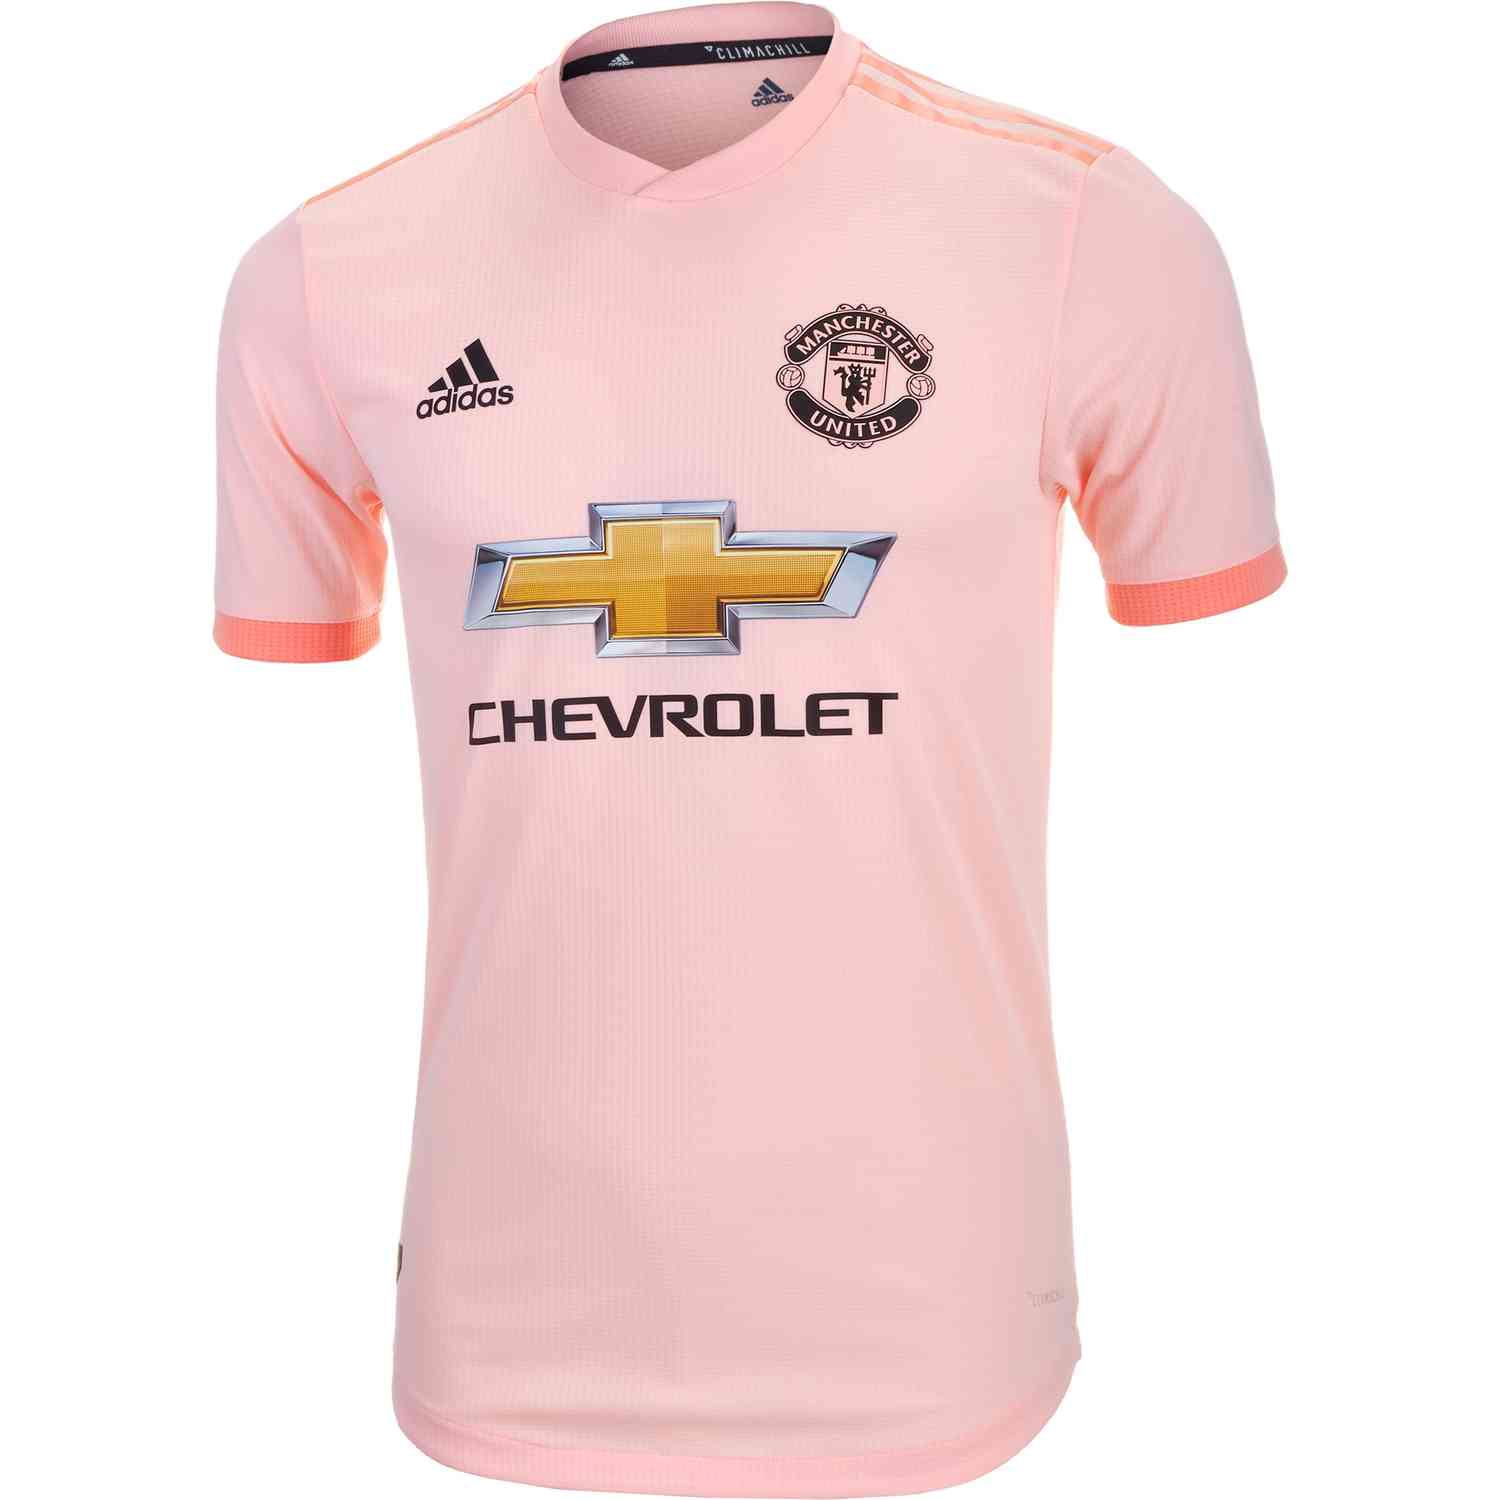 manchester united jersey 2018 to 2019